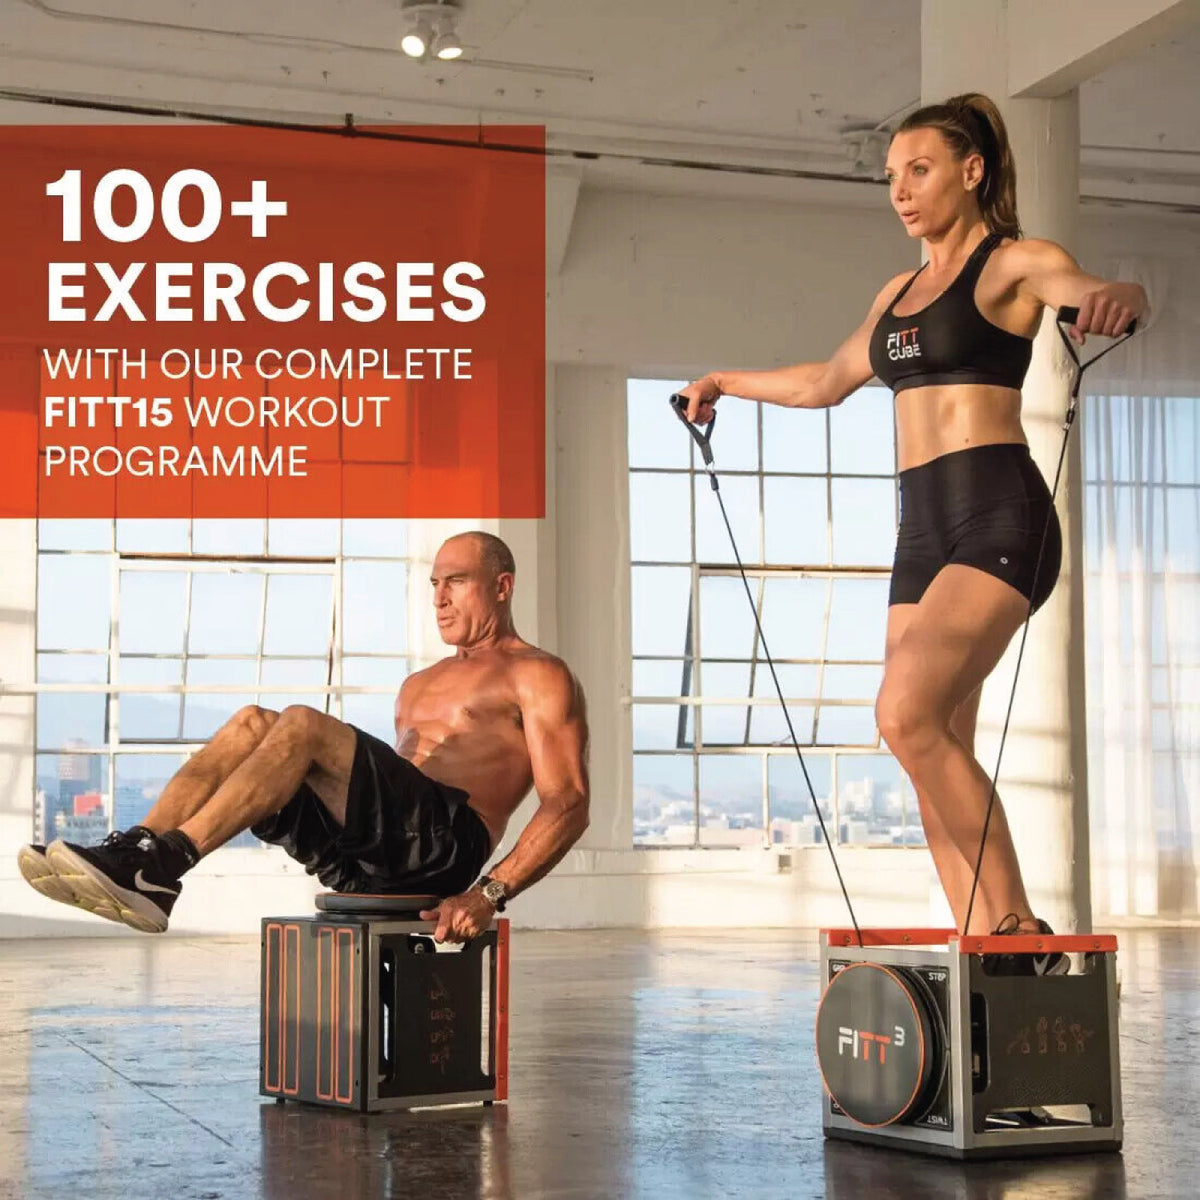 Hiit Rowing Workout for Fat Loss